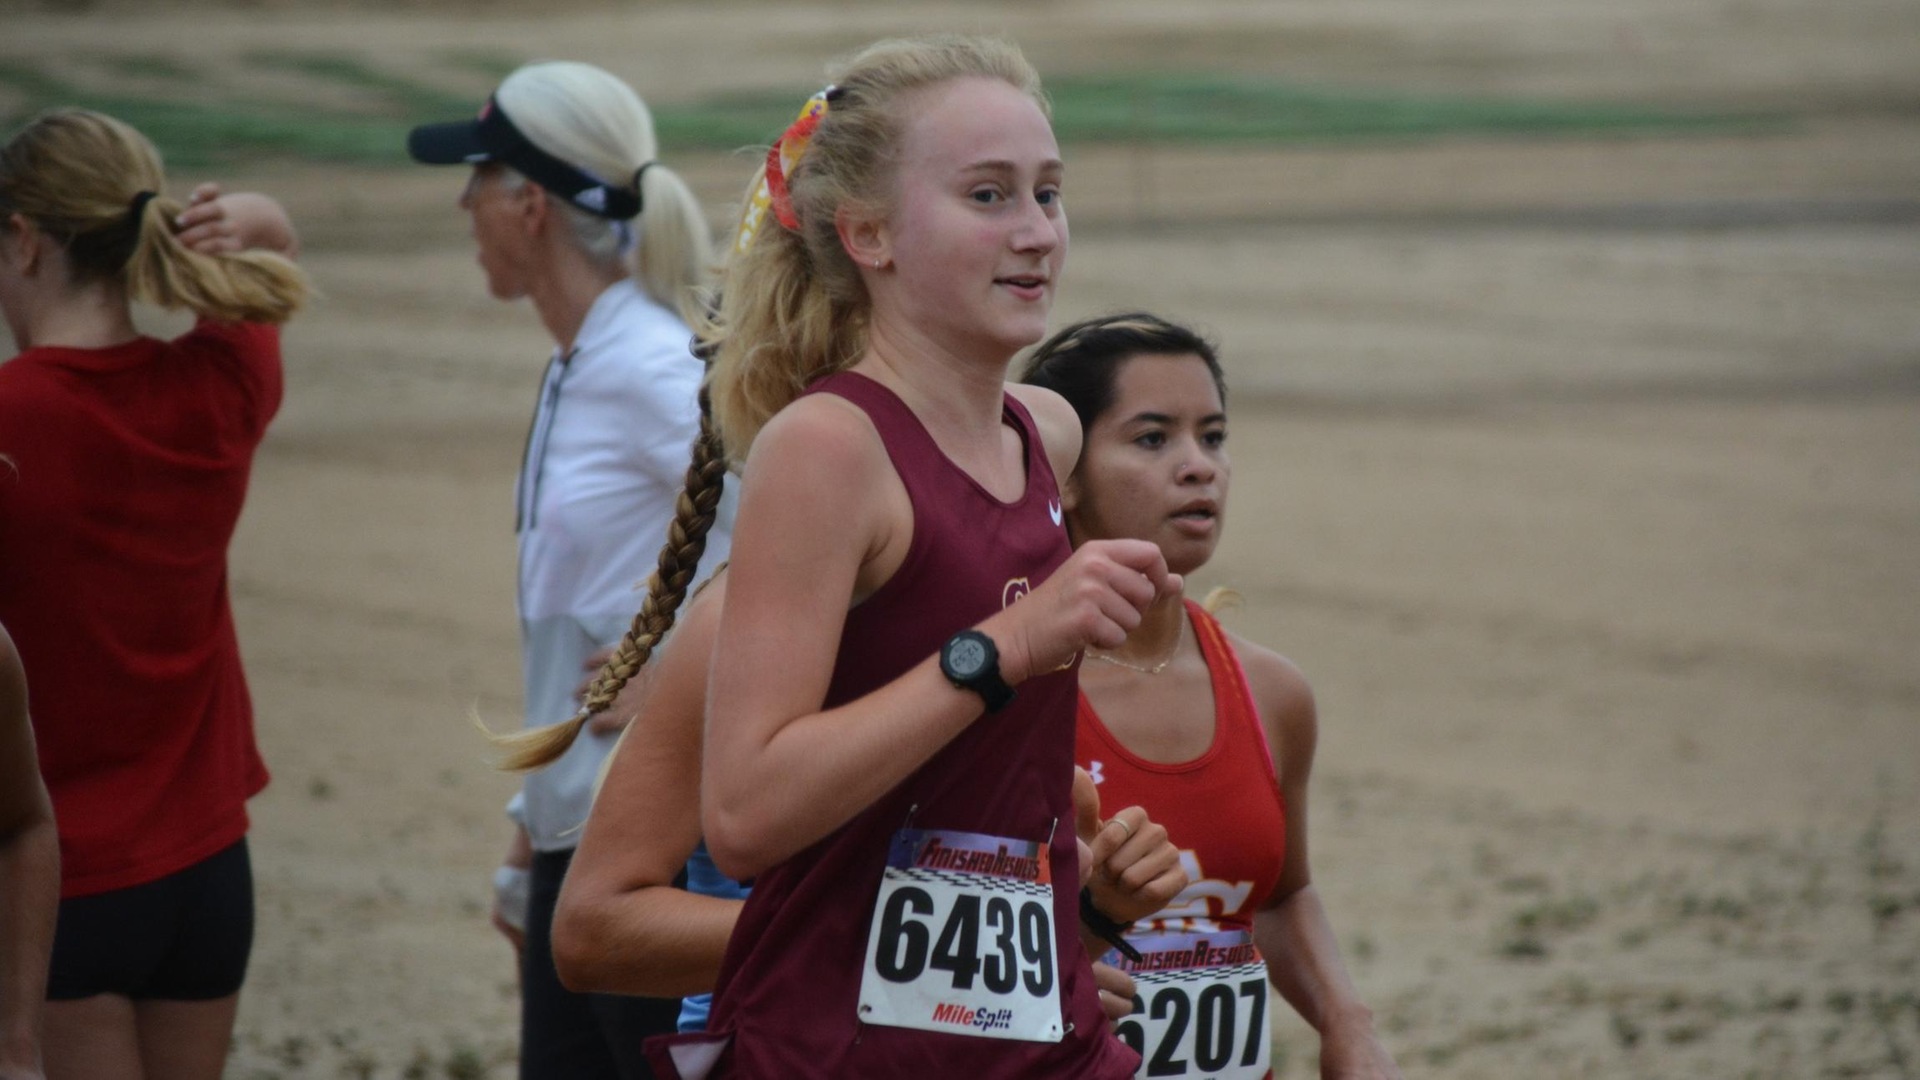 Hannah Weaver was the top CMS finisher on Saturday